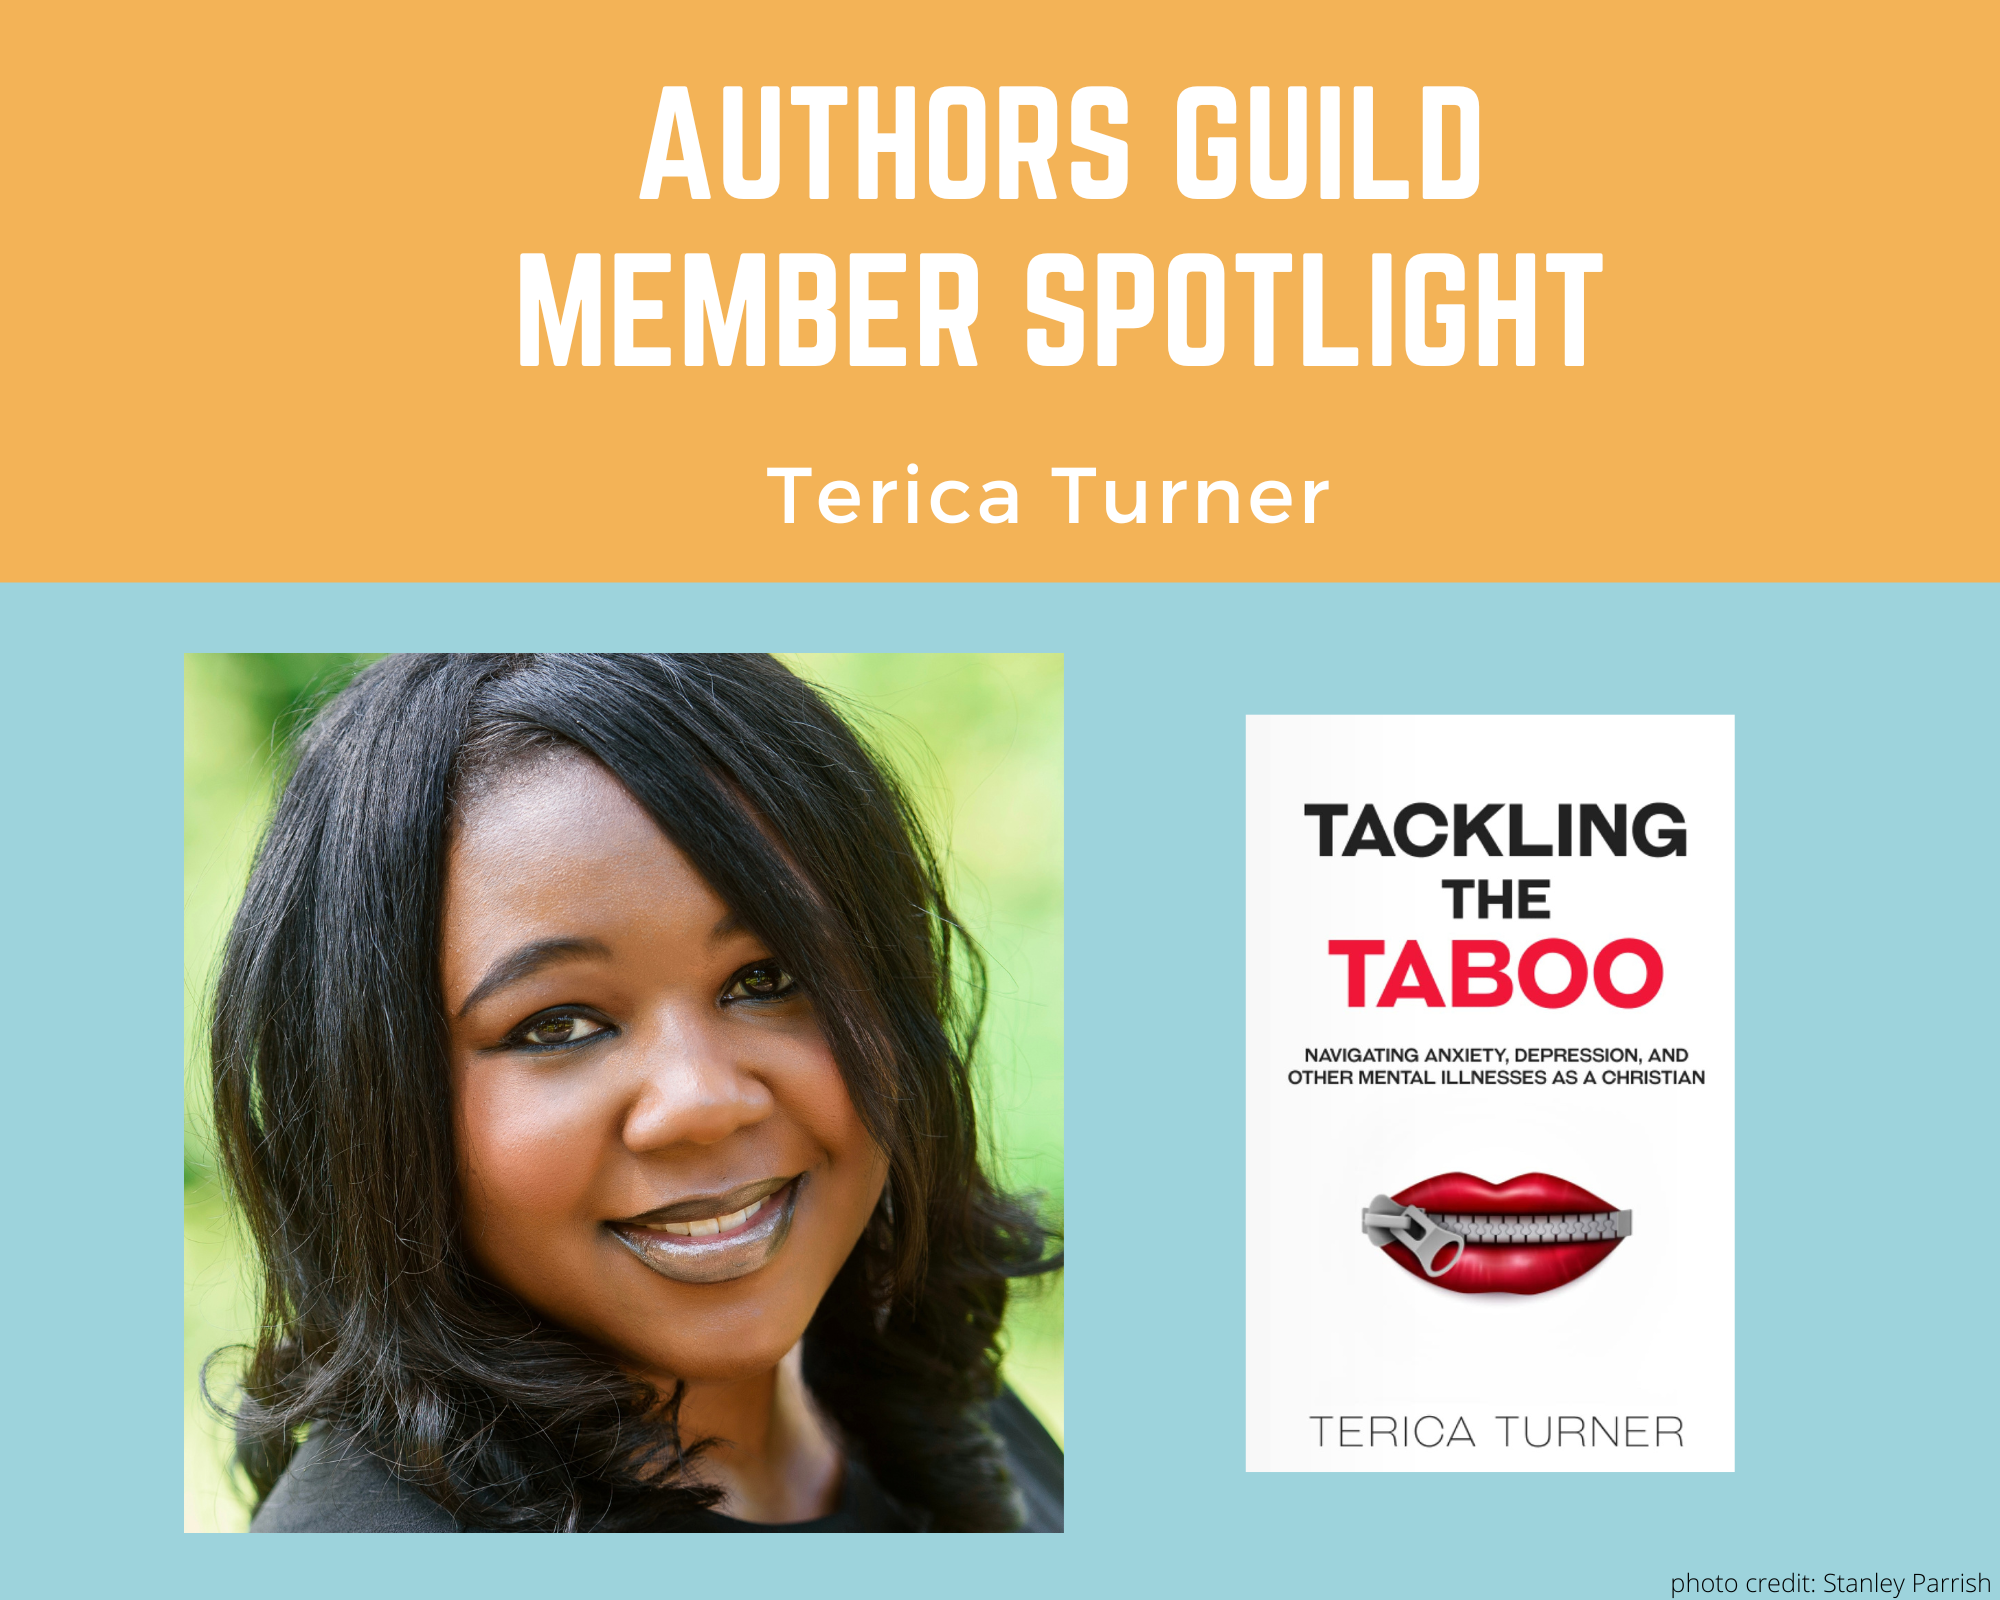 author Terica Turner smiling directly at the camera and an image of her book Tackling the Taboo